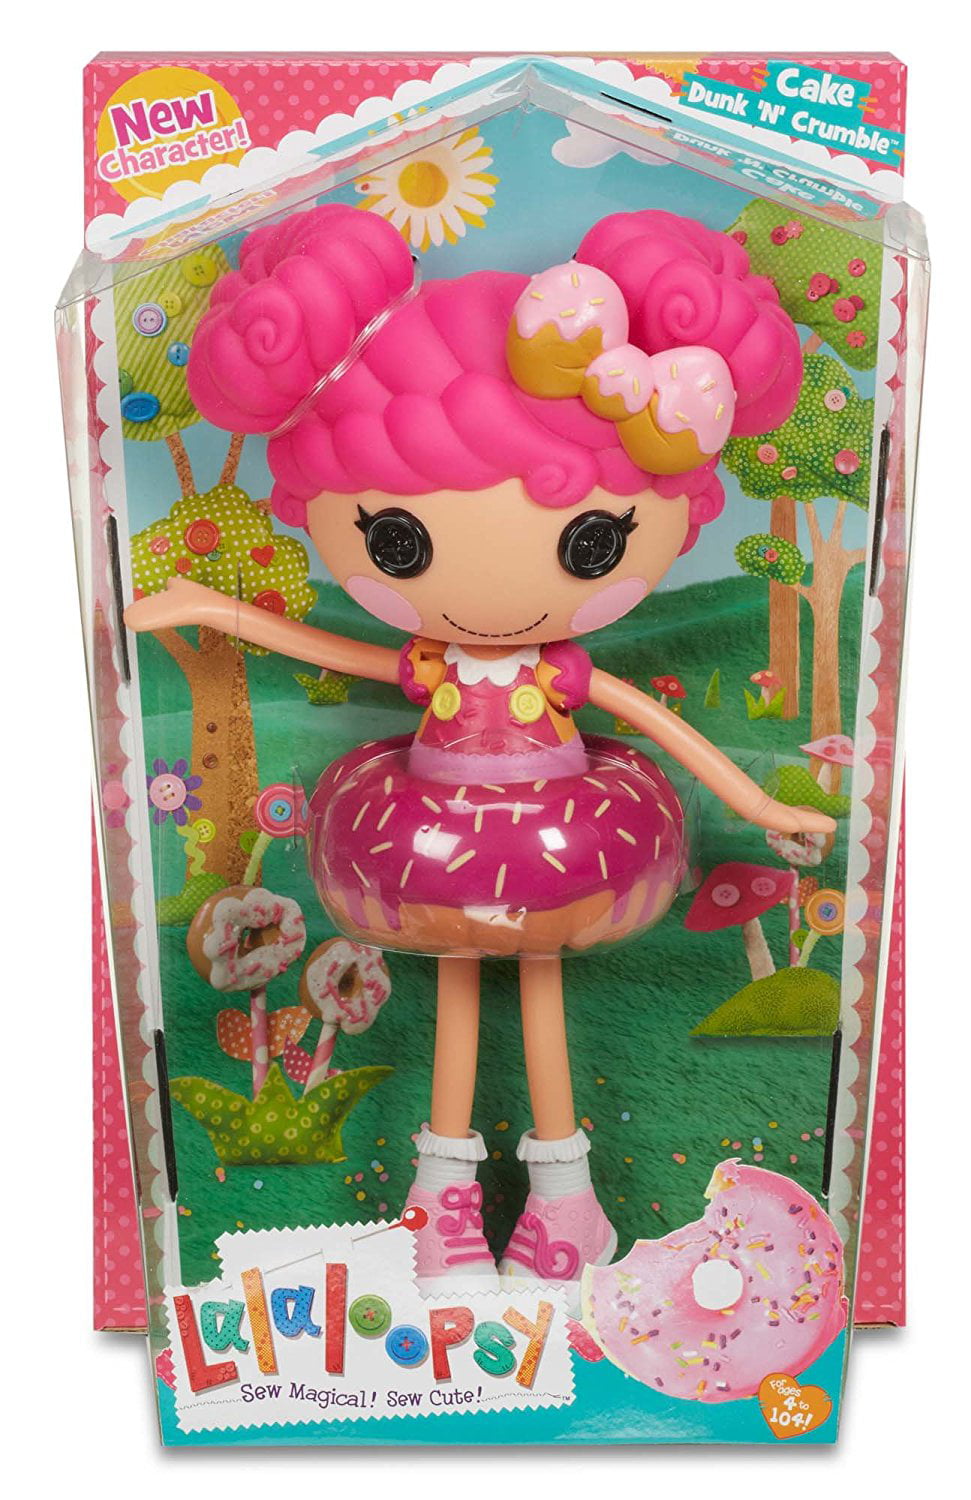 Details about   LALALOOPSY Mini CAKE DUNK 'N' CRUMBLE MINI #8 of SERIES 8 Sweet Shoppe 